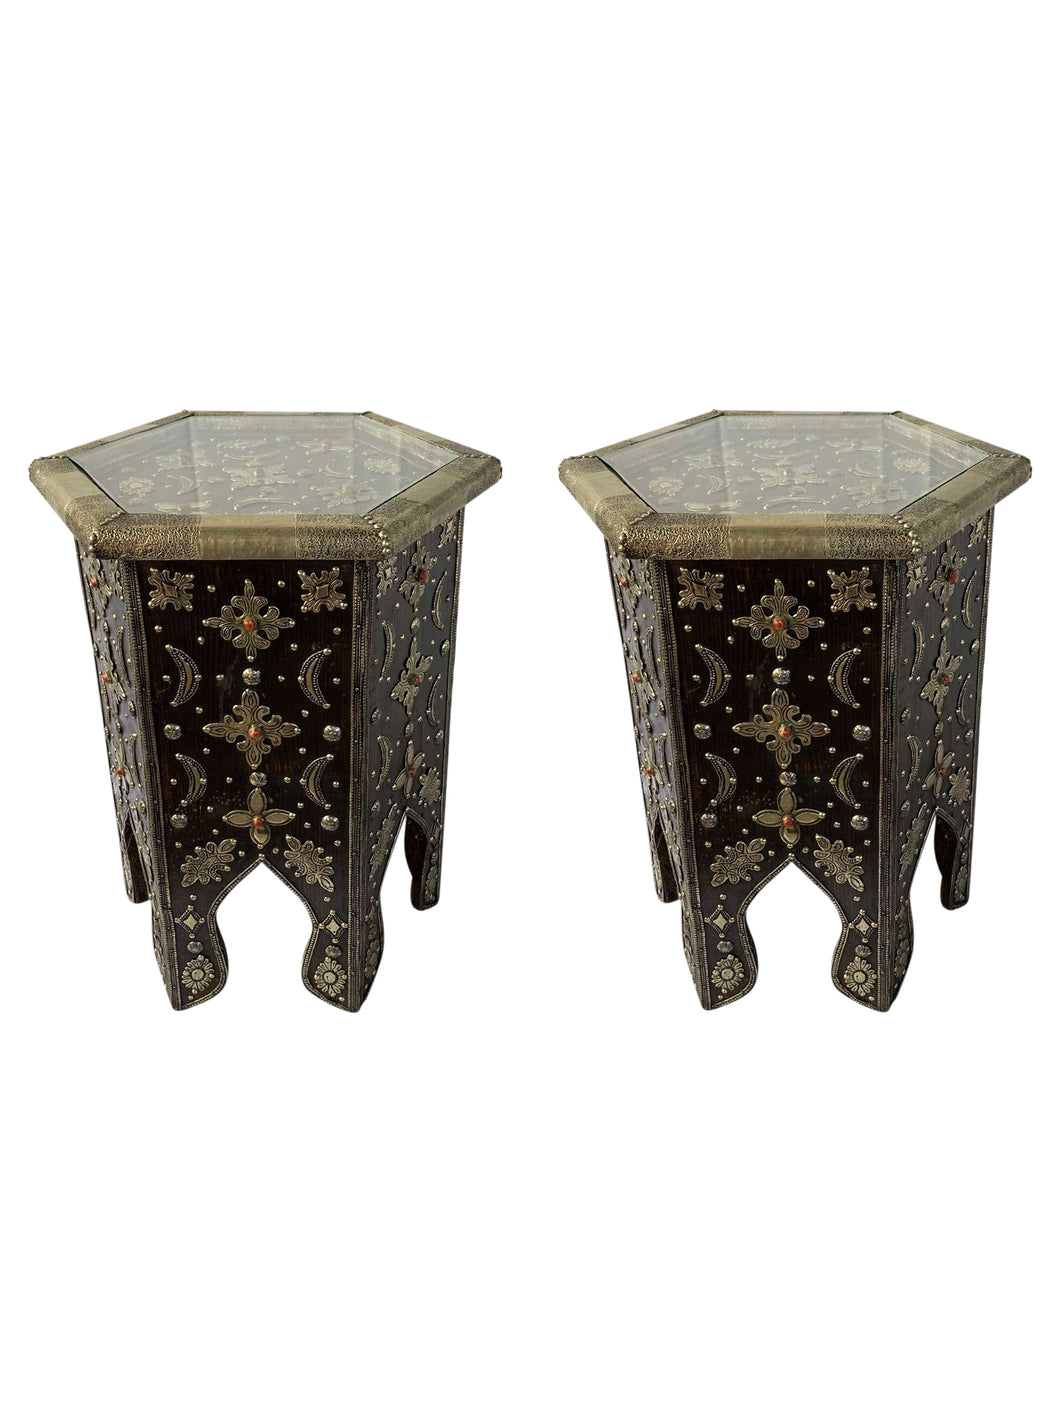 Moroccan Wood Embellished Side Tables (Pair)